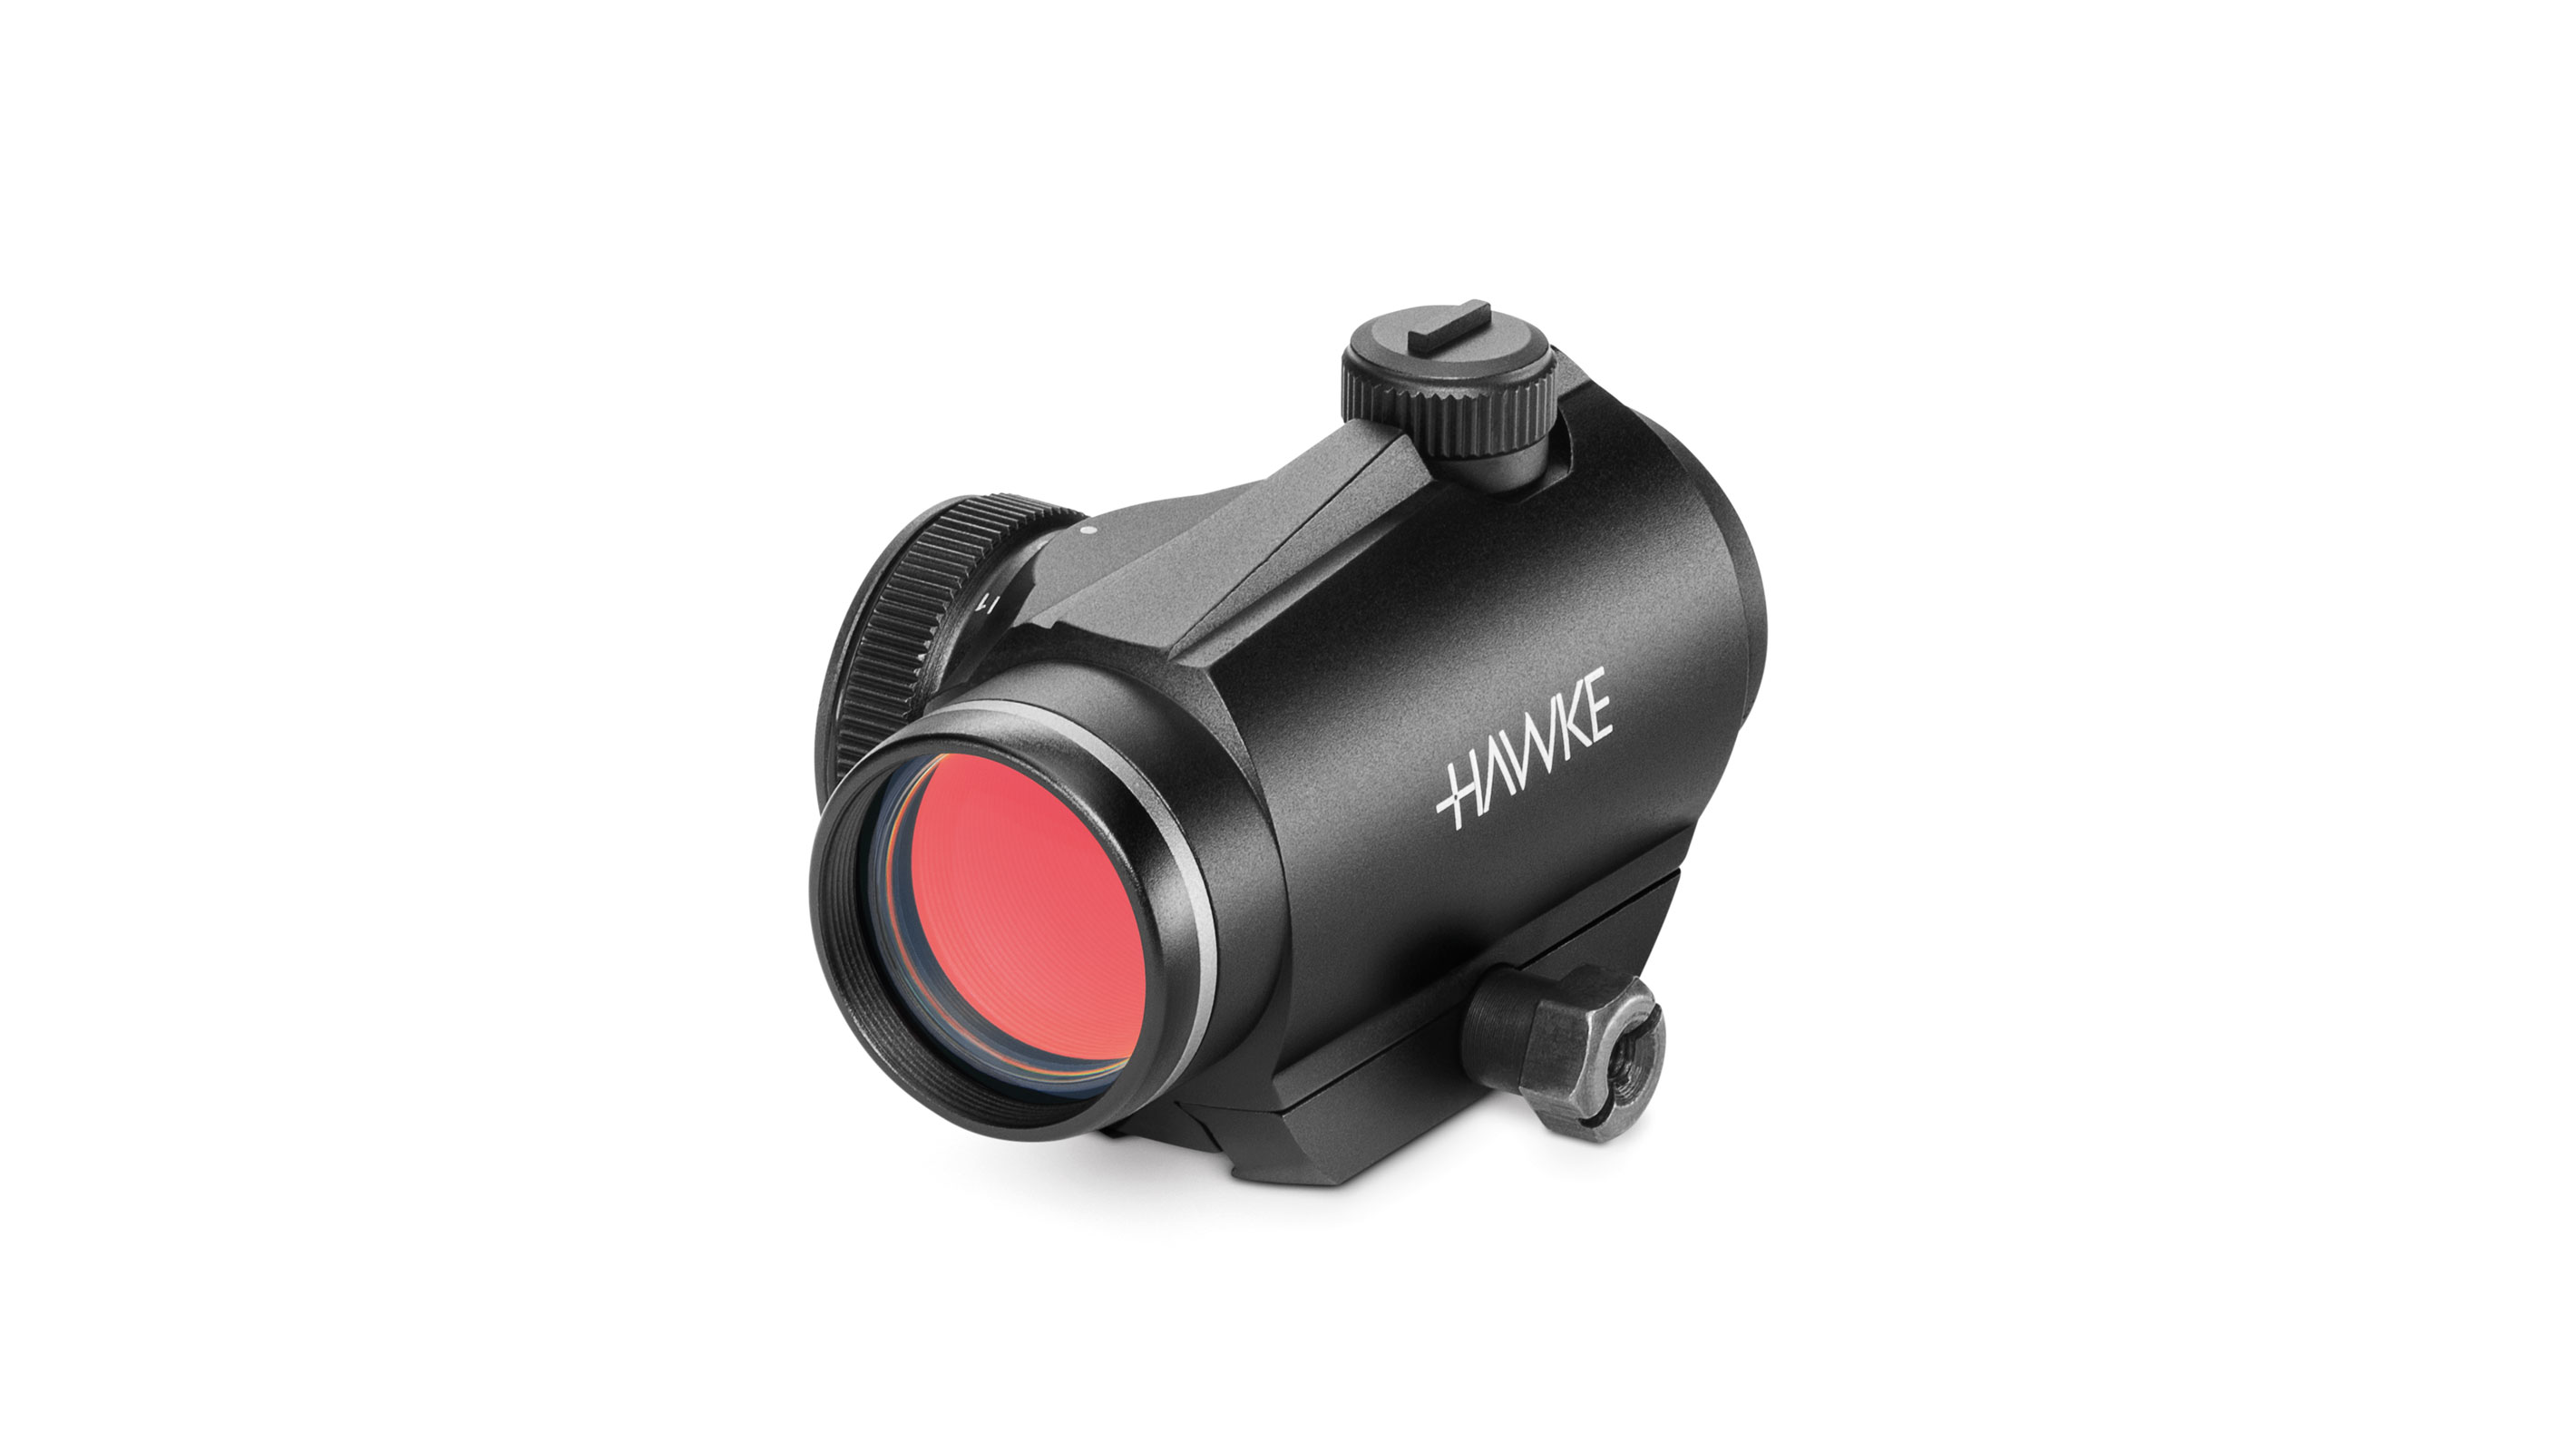 Objective End View of The Hawke Vantage Red Dot 1x20 With Integrated Dovetail Mounts